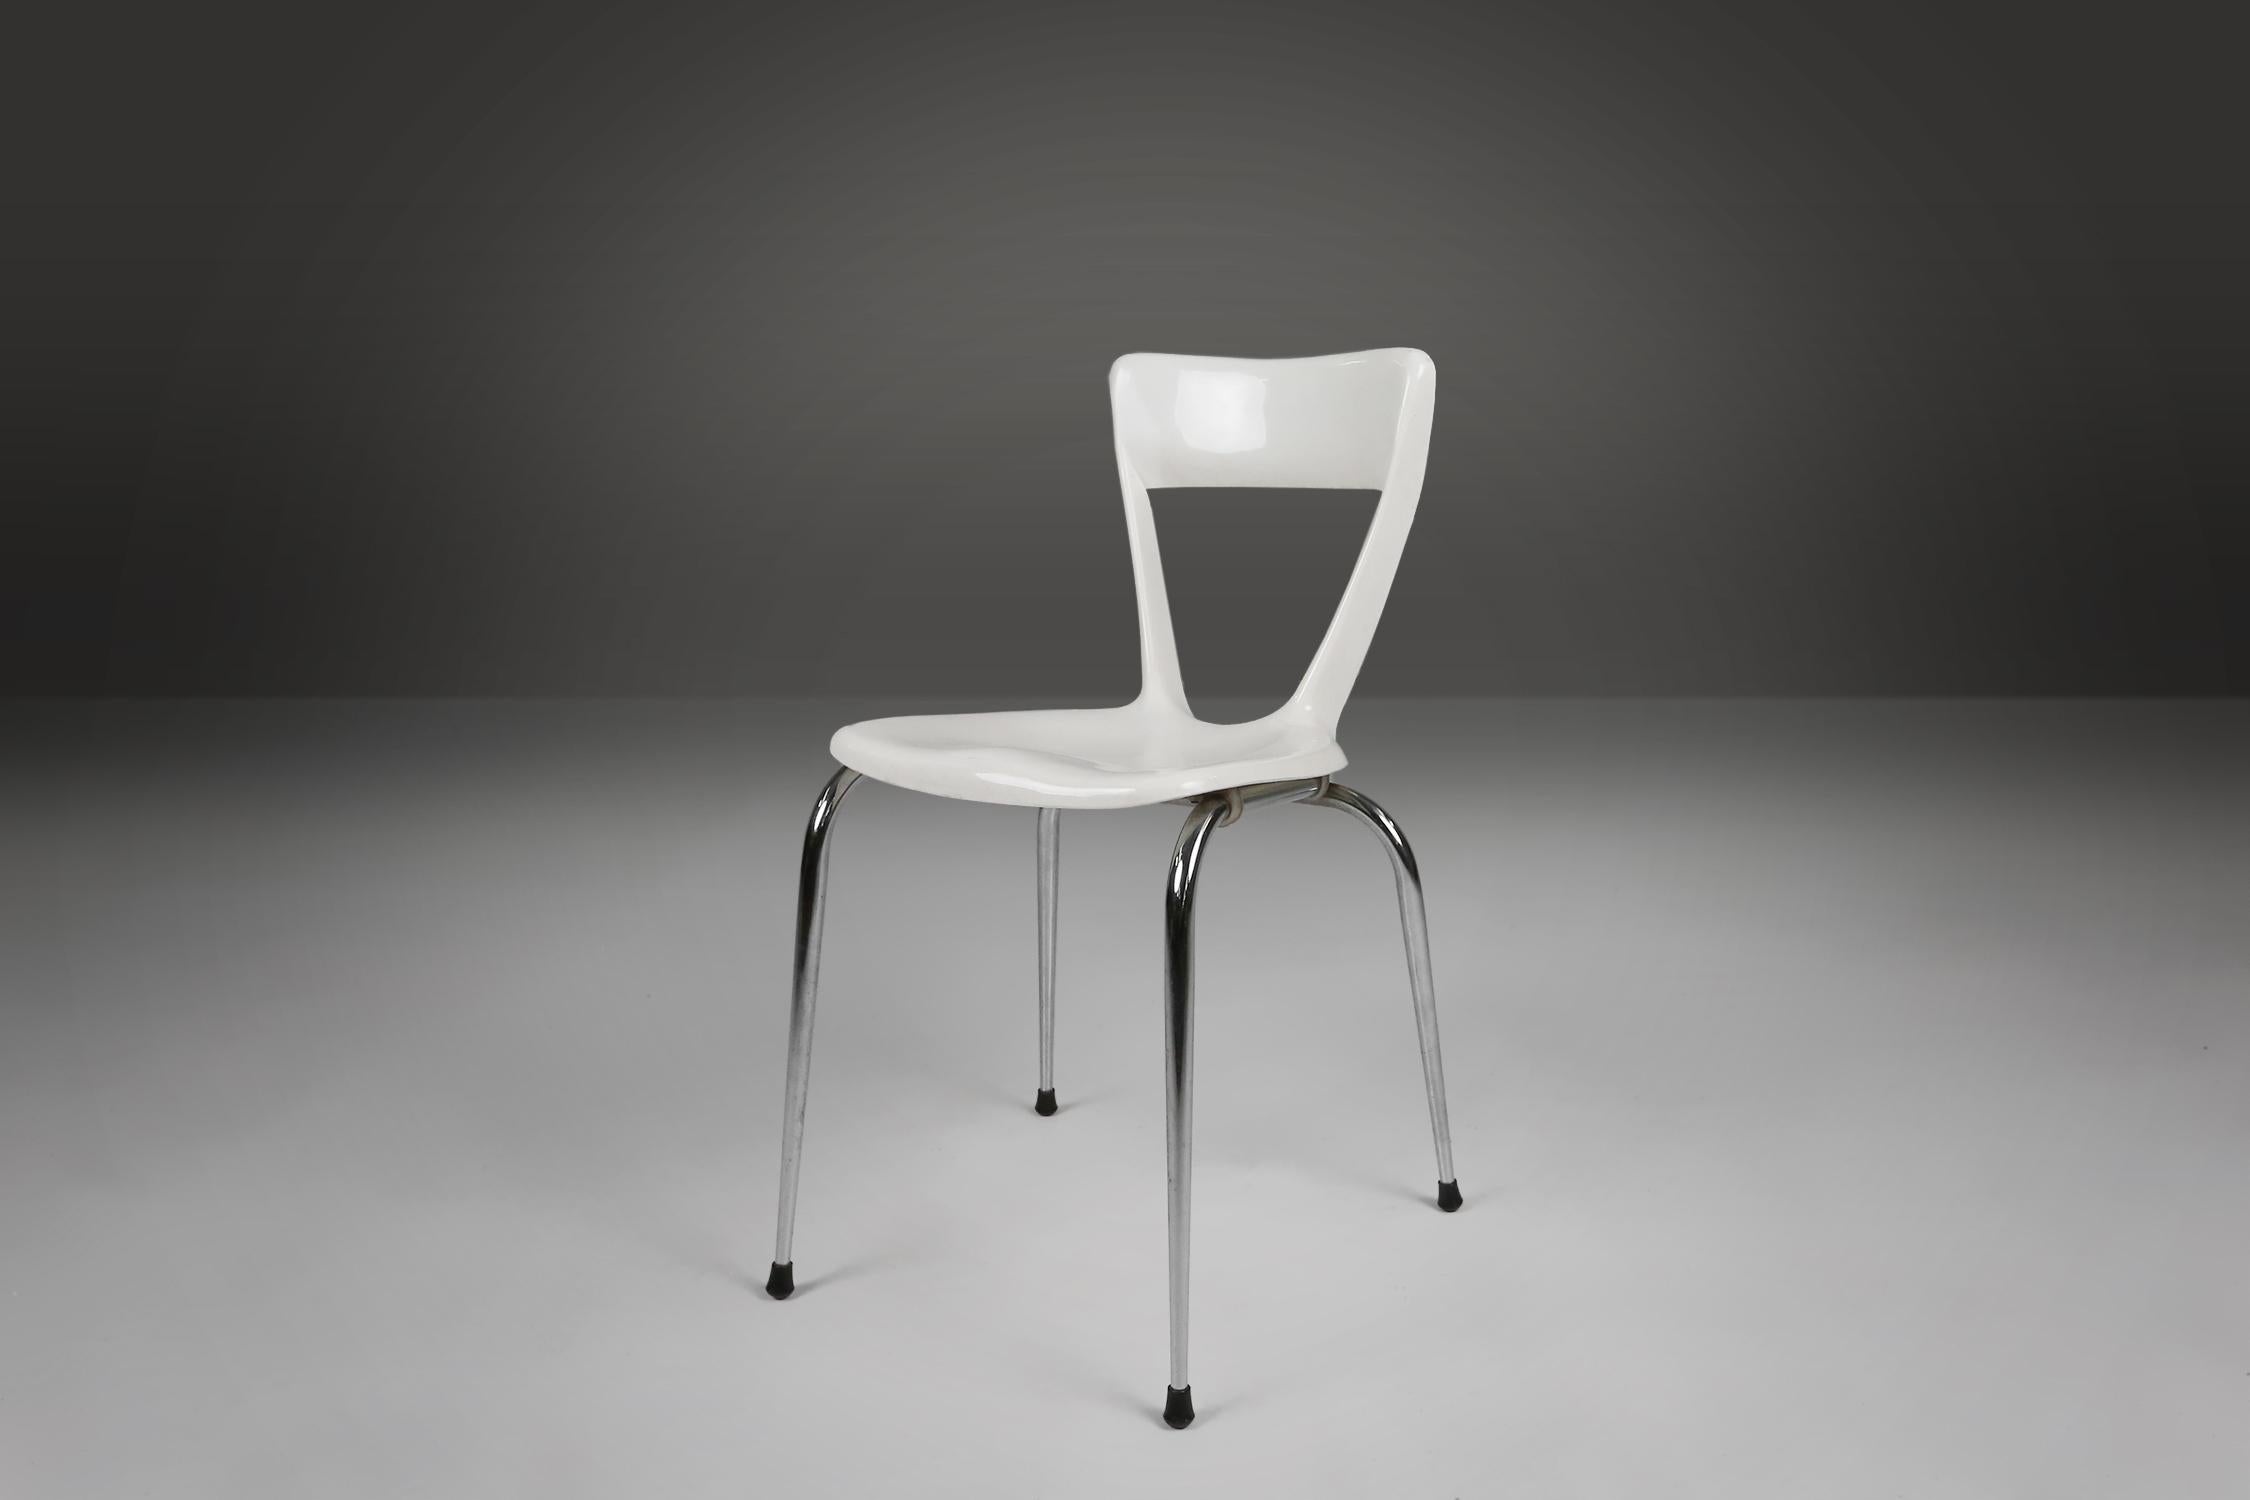 France / 1960s / Gilac No. 1183 / white dining chair / metal and plastic

Vintage sixties white Gilac dining chair, marked No. 1183, made in France. A seamlessly blend of style and durability and a nice chair to mix and match with other vintage